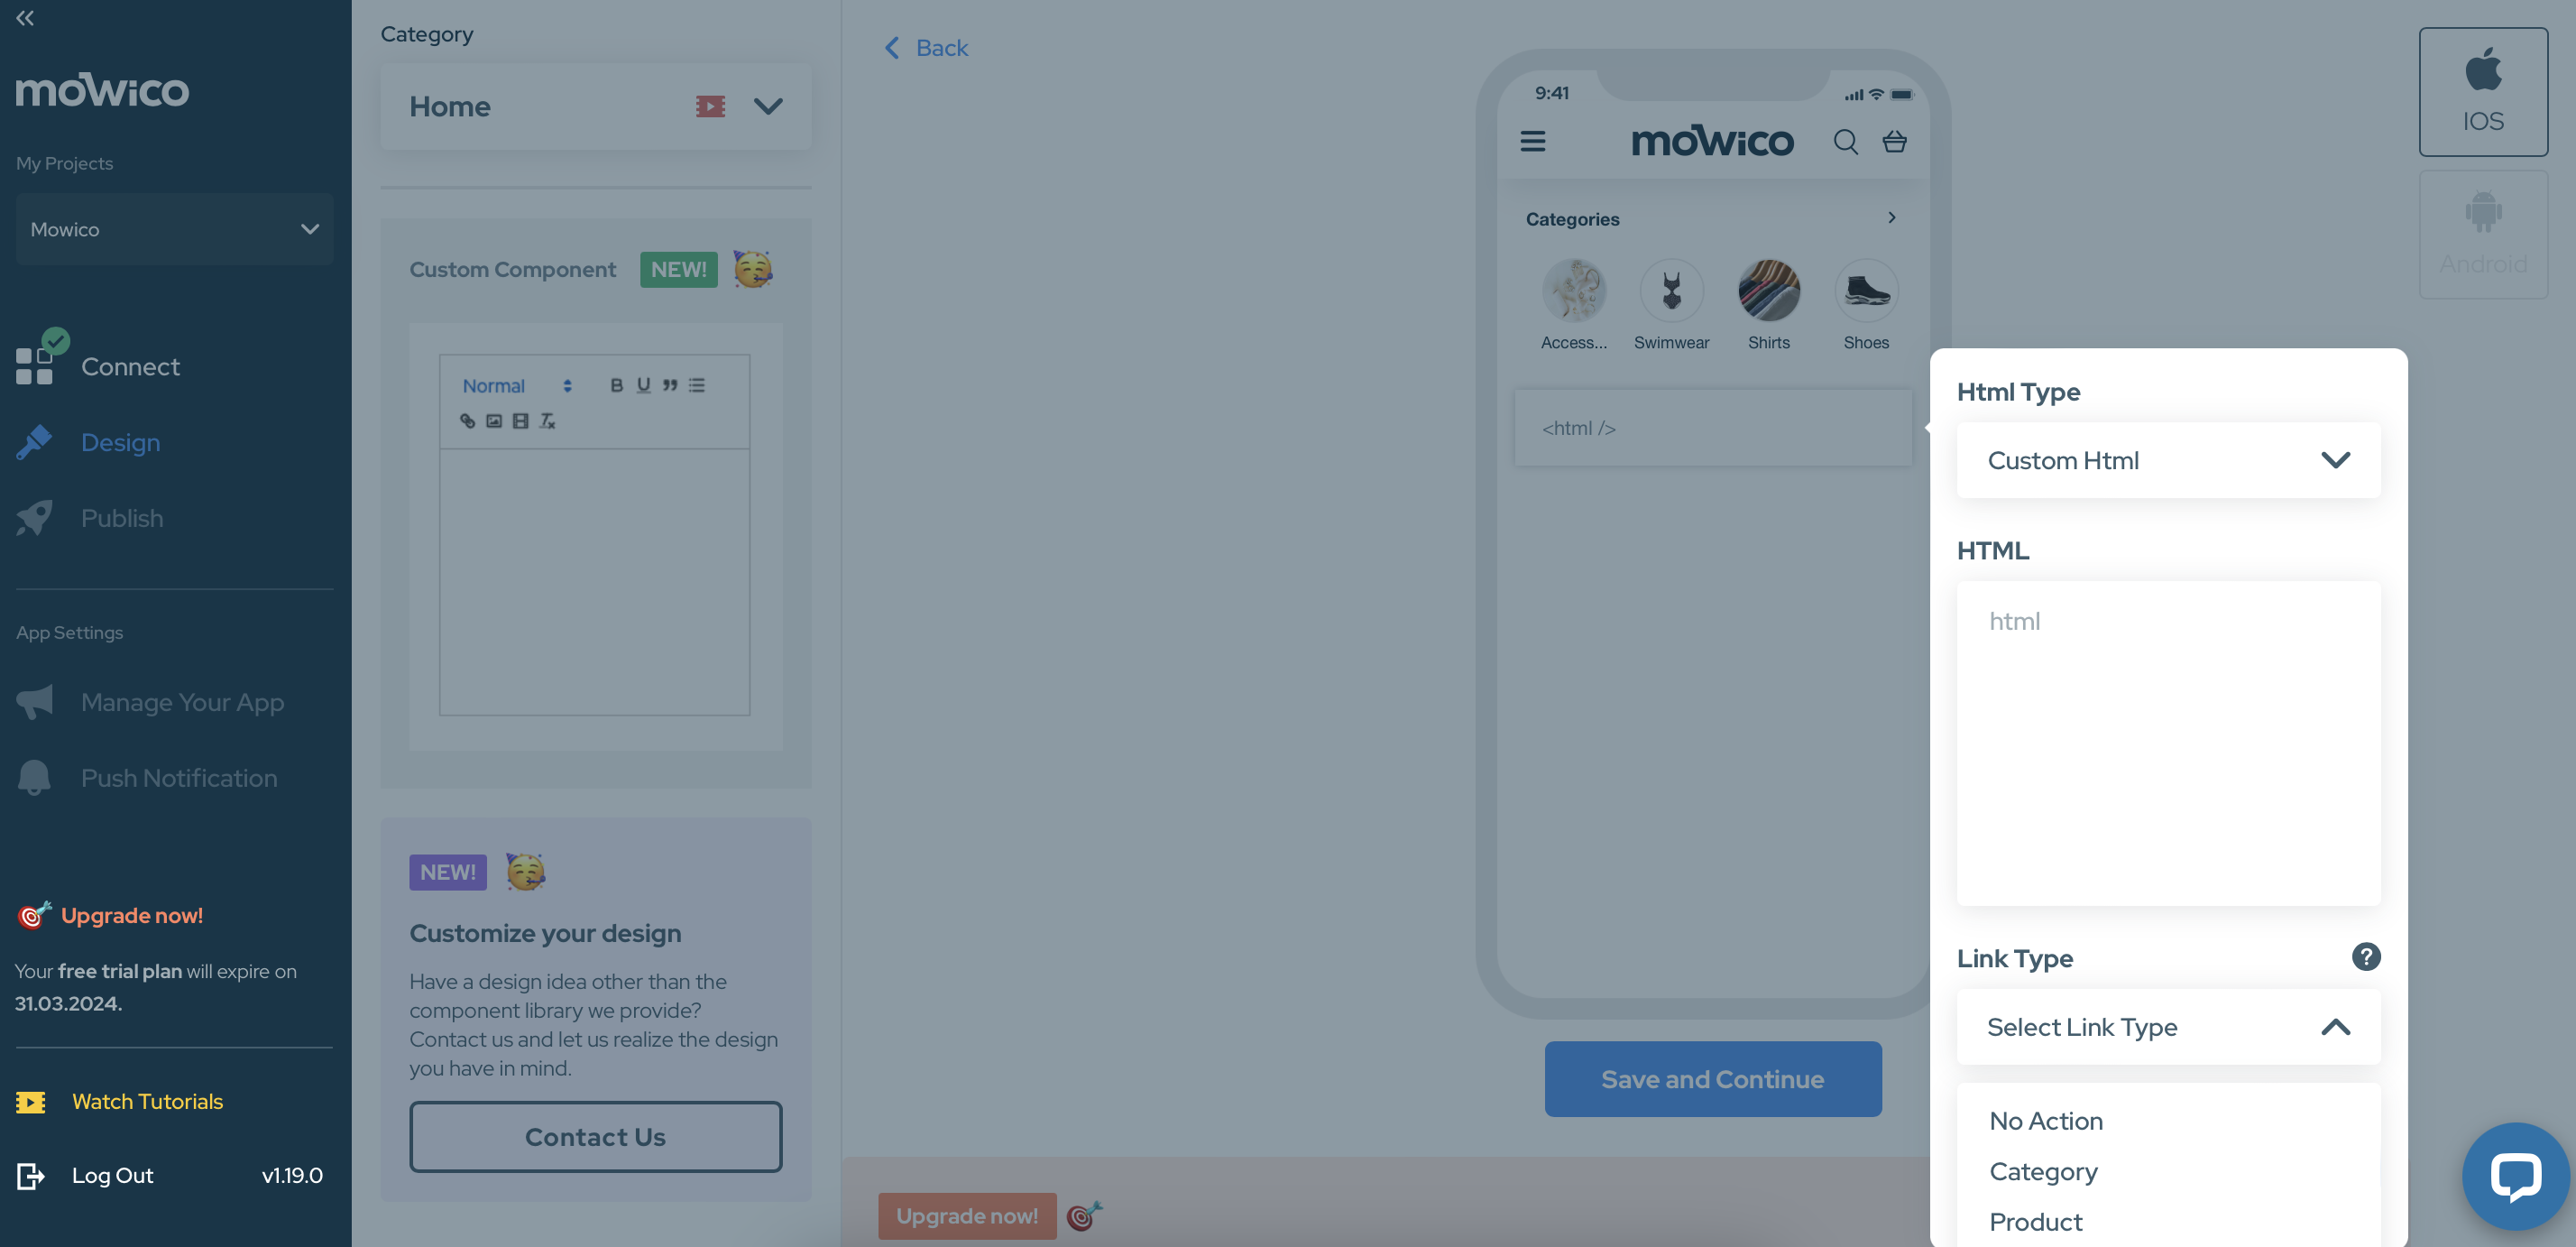 How to add and edit custom components with Mowico